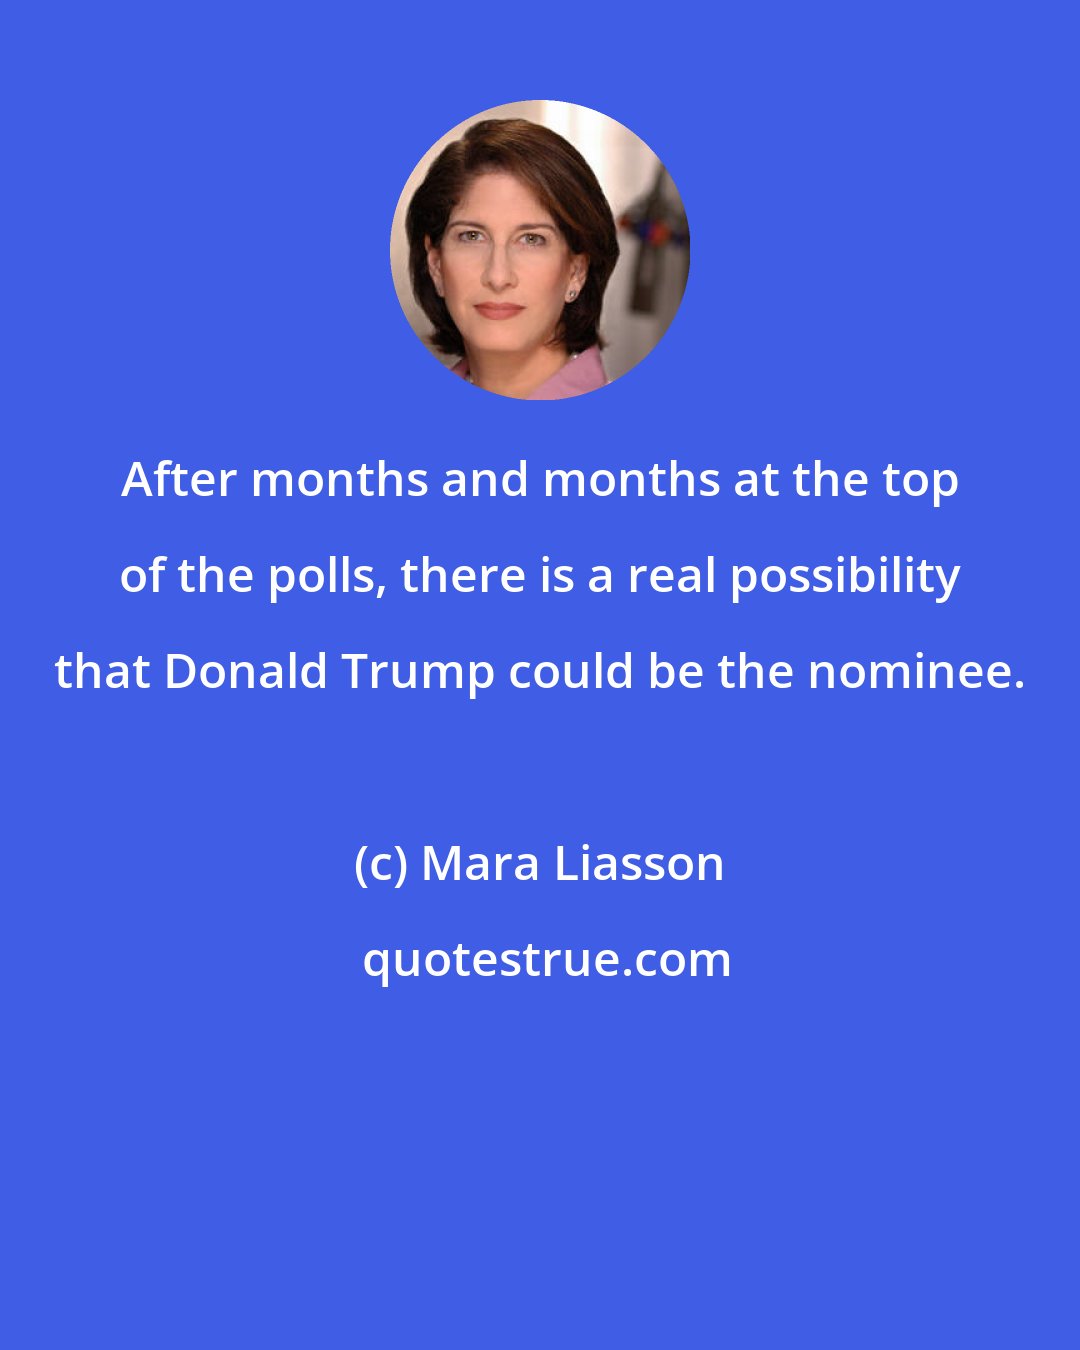 Mara Liasson: After months and months at the top of the polls, there is a real possibility that Donald Trump could be the nominee.